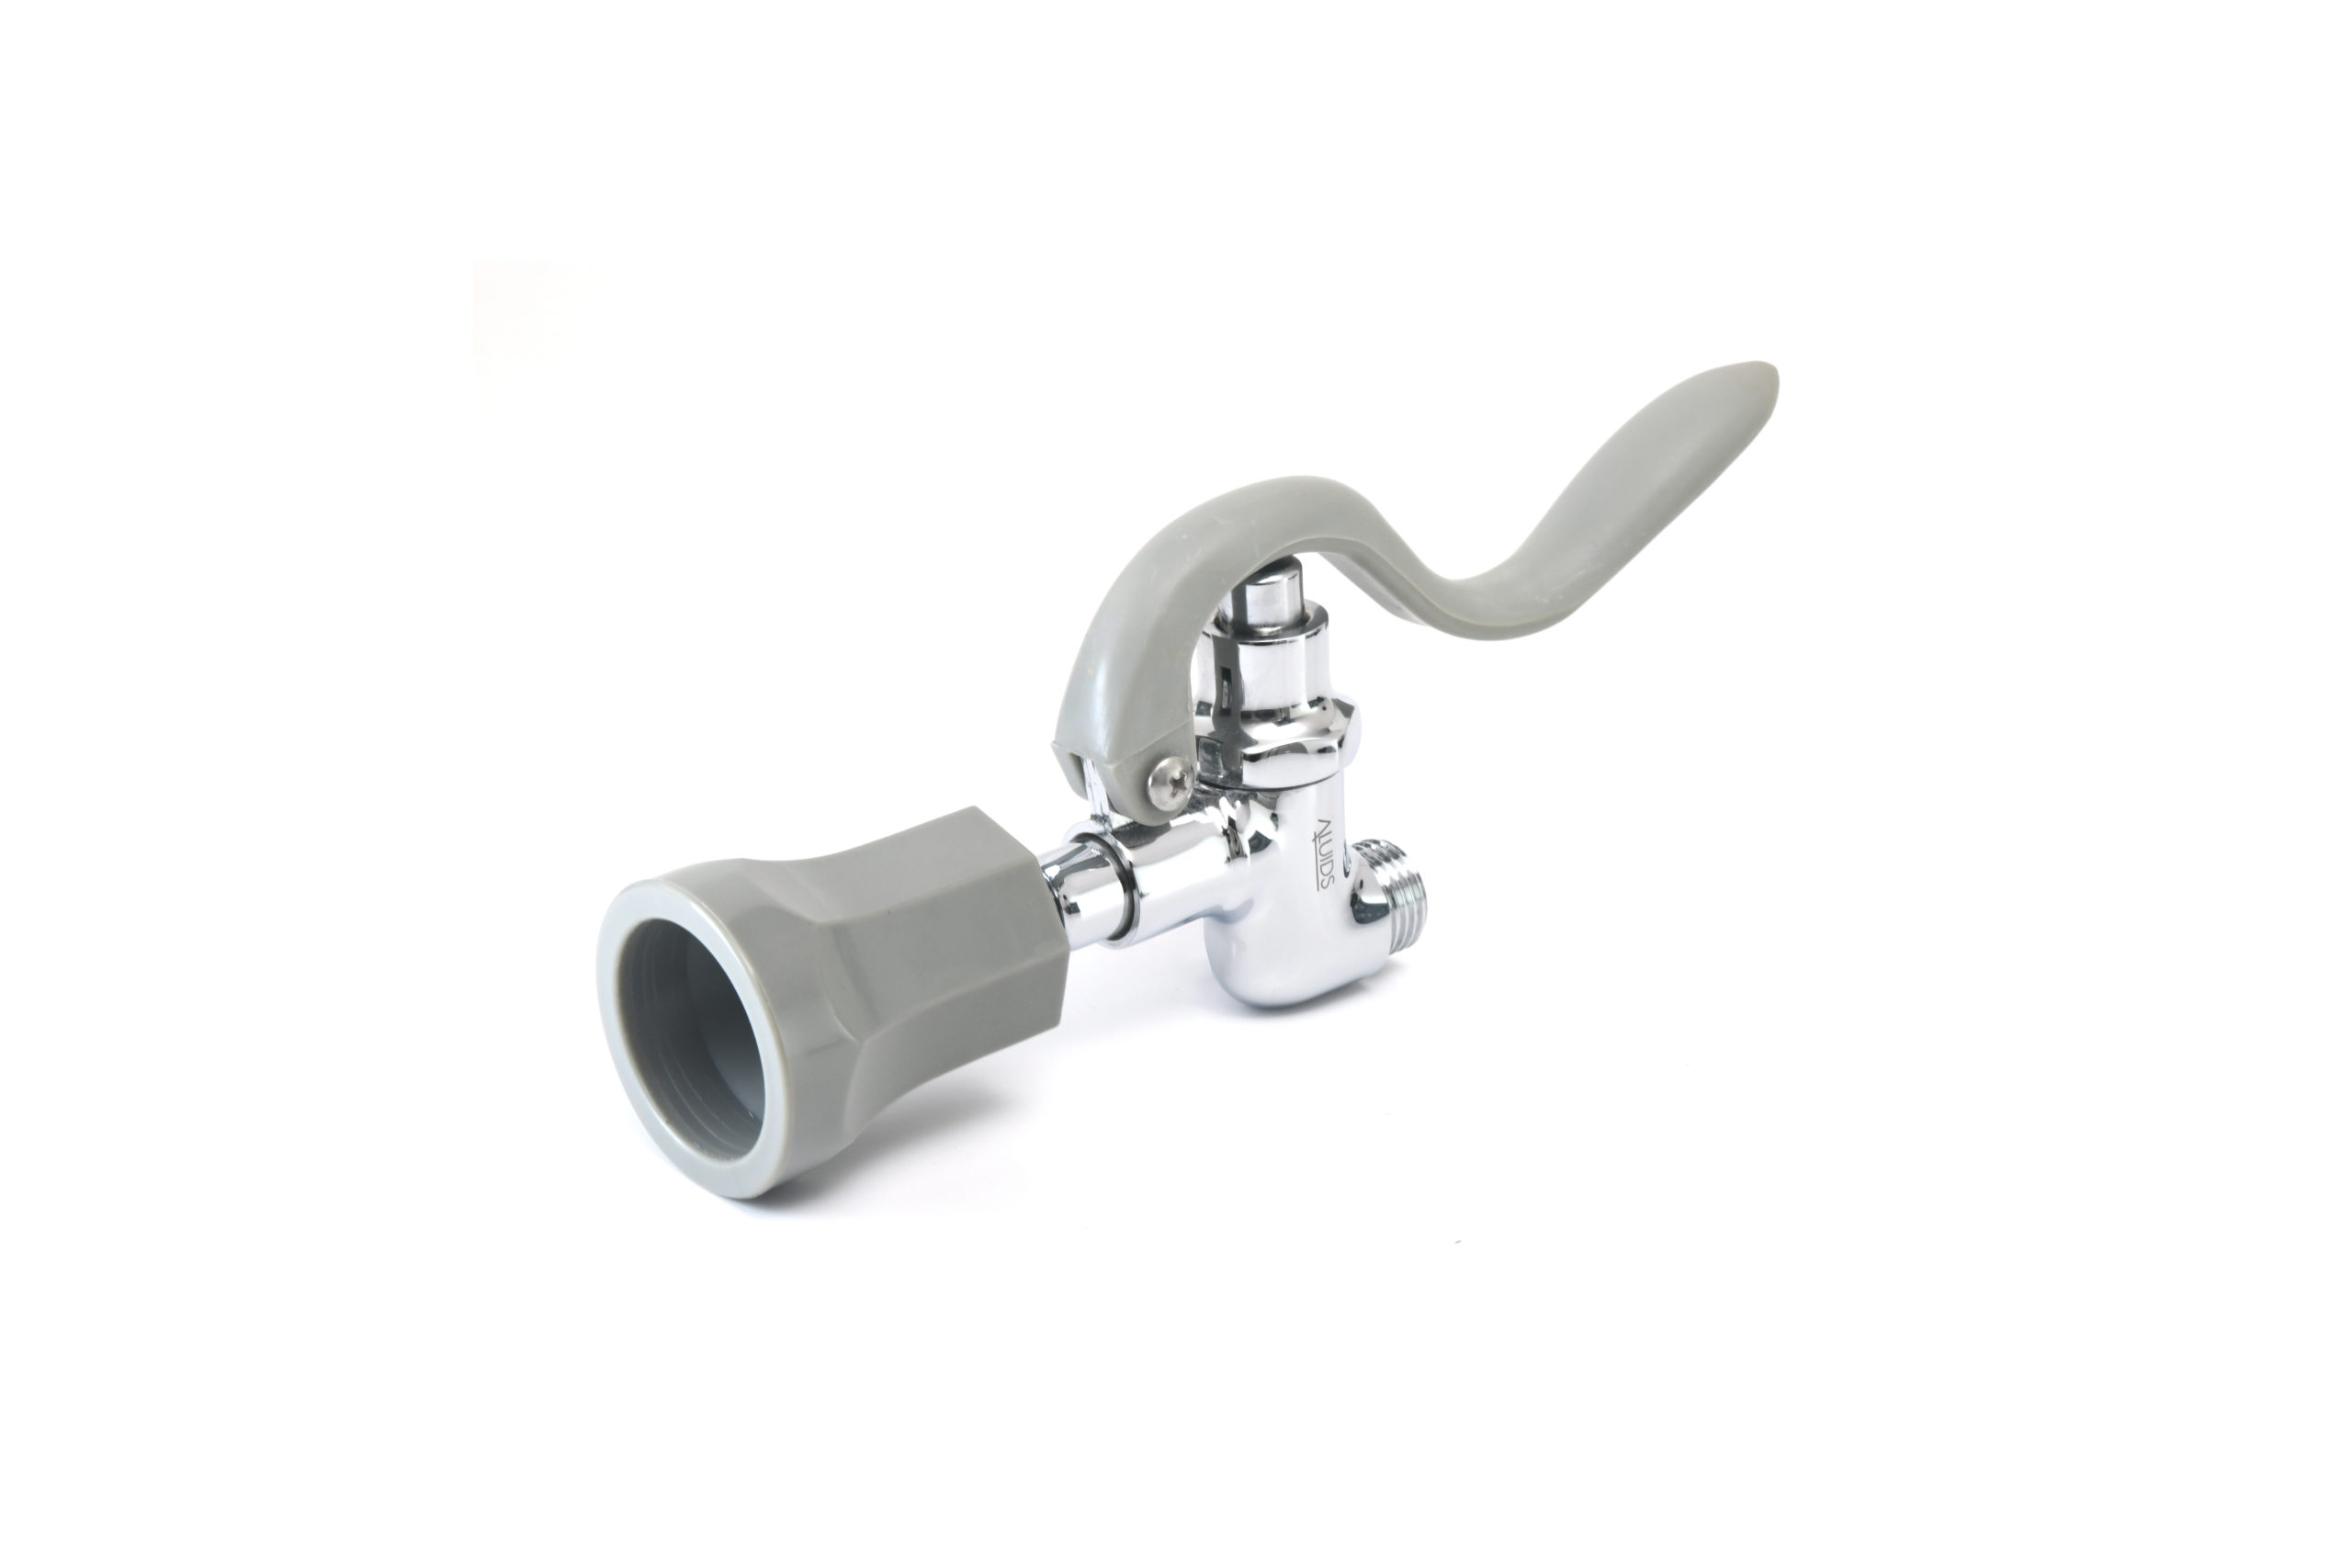 Low Flow Spray Valve For commercial kitchens Pre Rinse 1.2 GPM, 4.54 LPM C8042 aluids